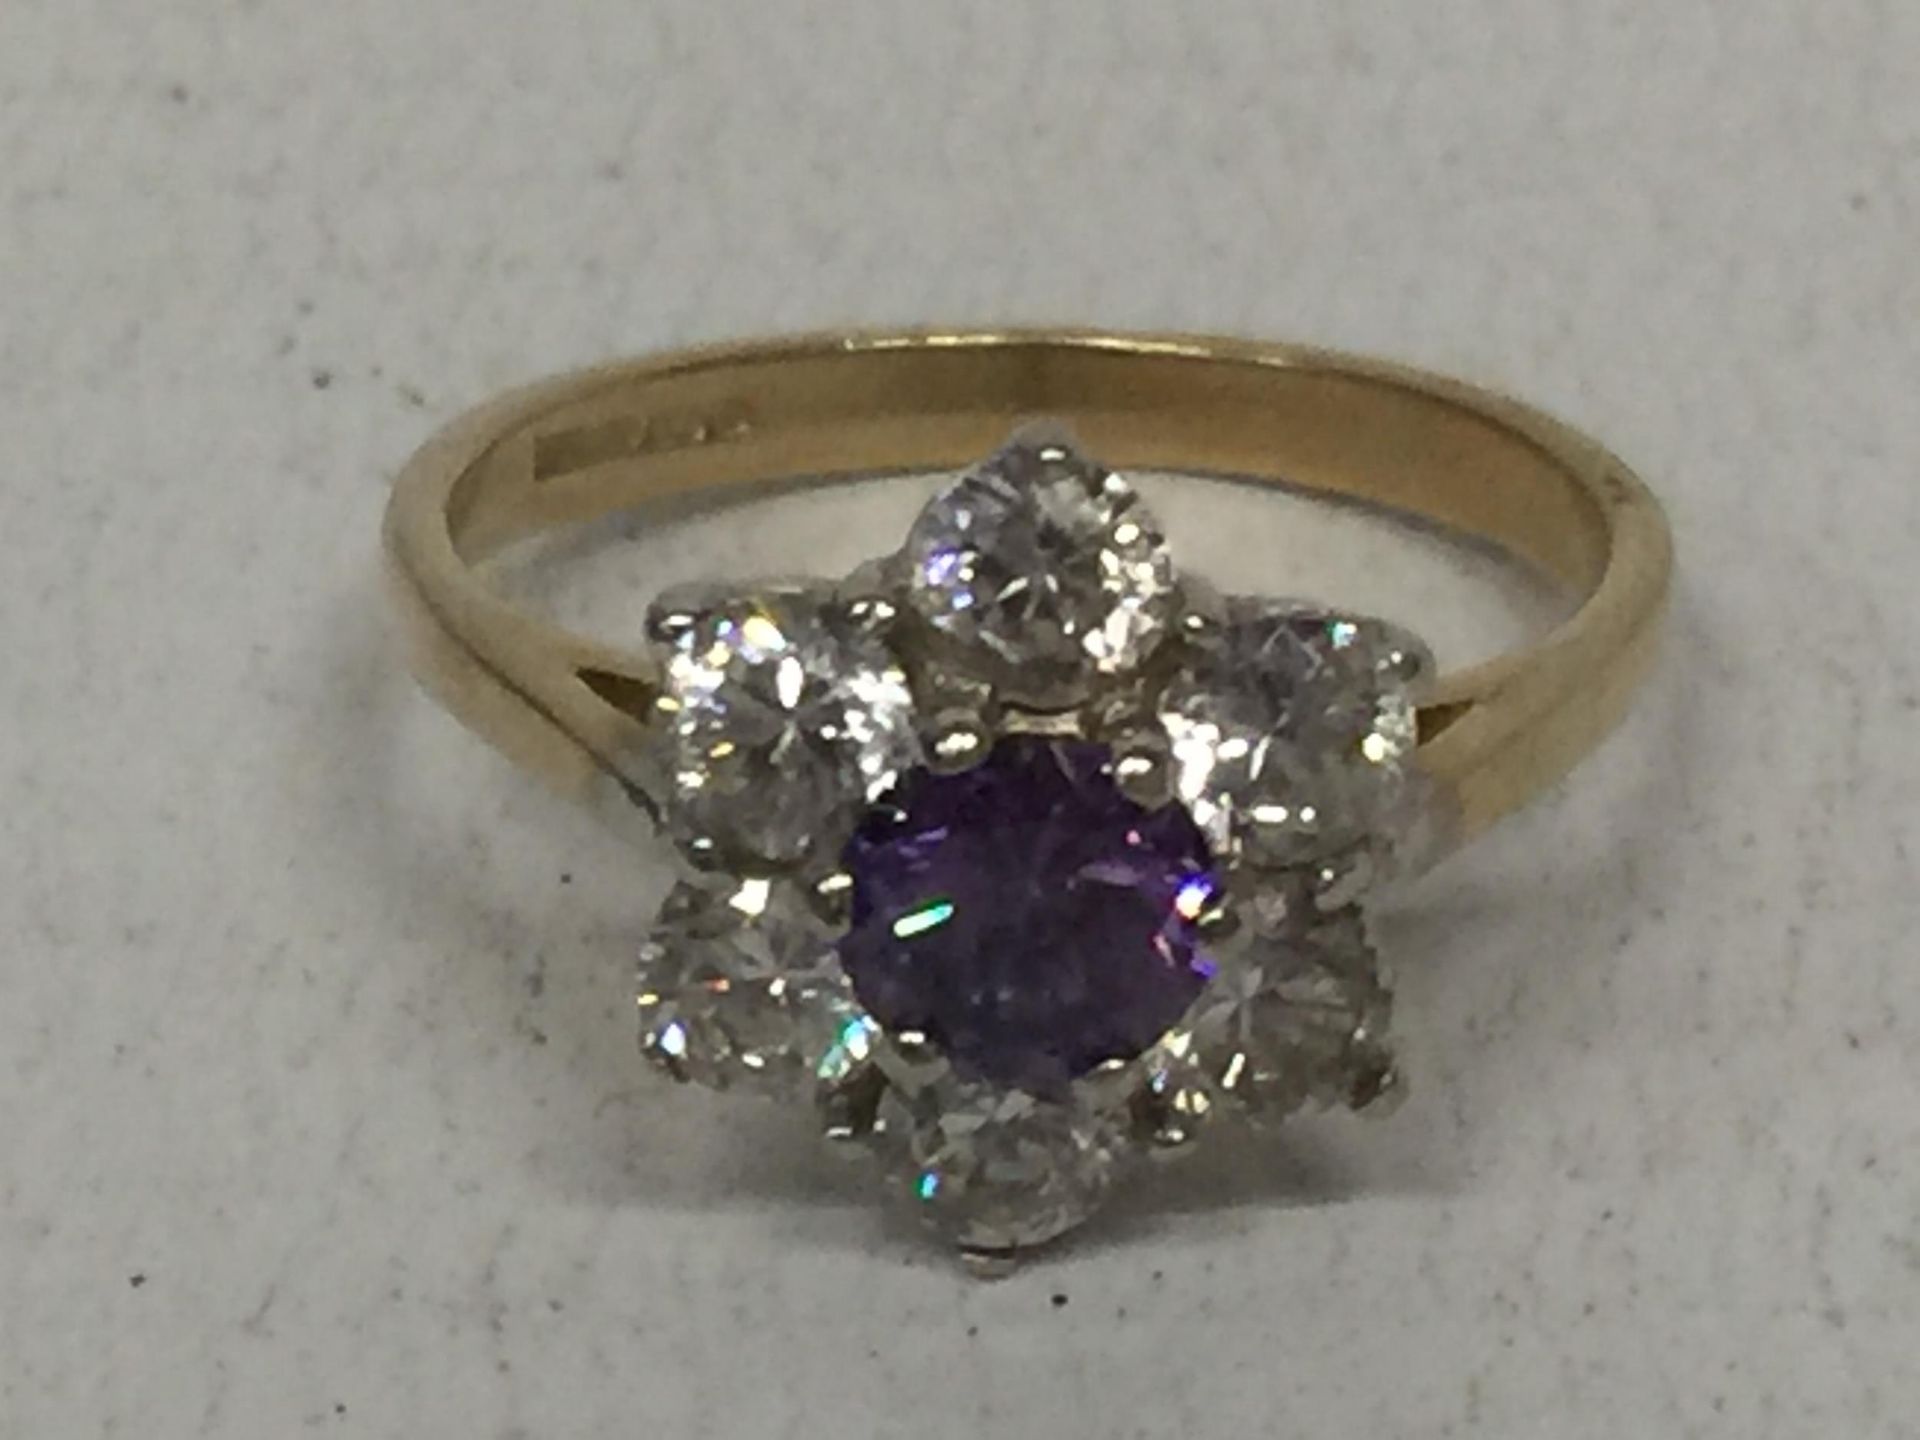 A 9 CARAT GOLD RING WITH PURPLE STONES AND CUBIC ZIRCONIAS